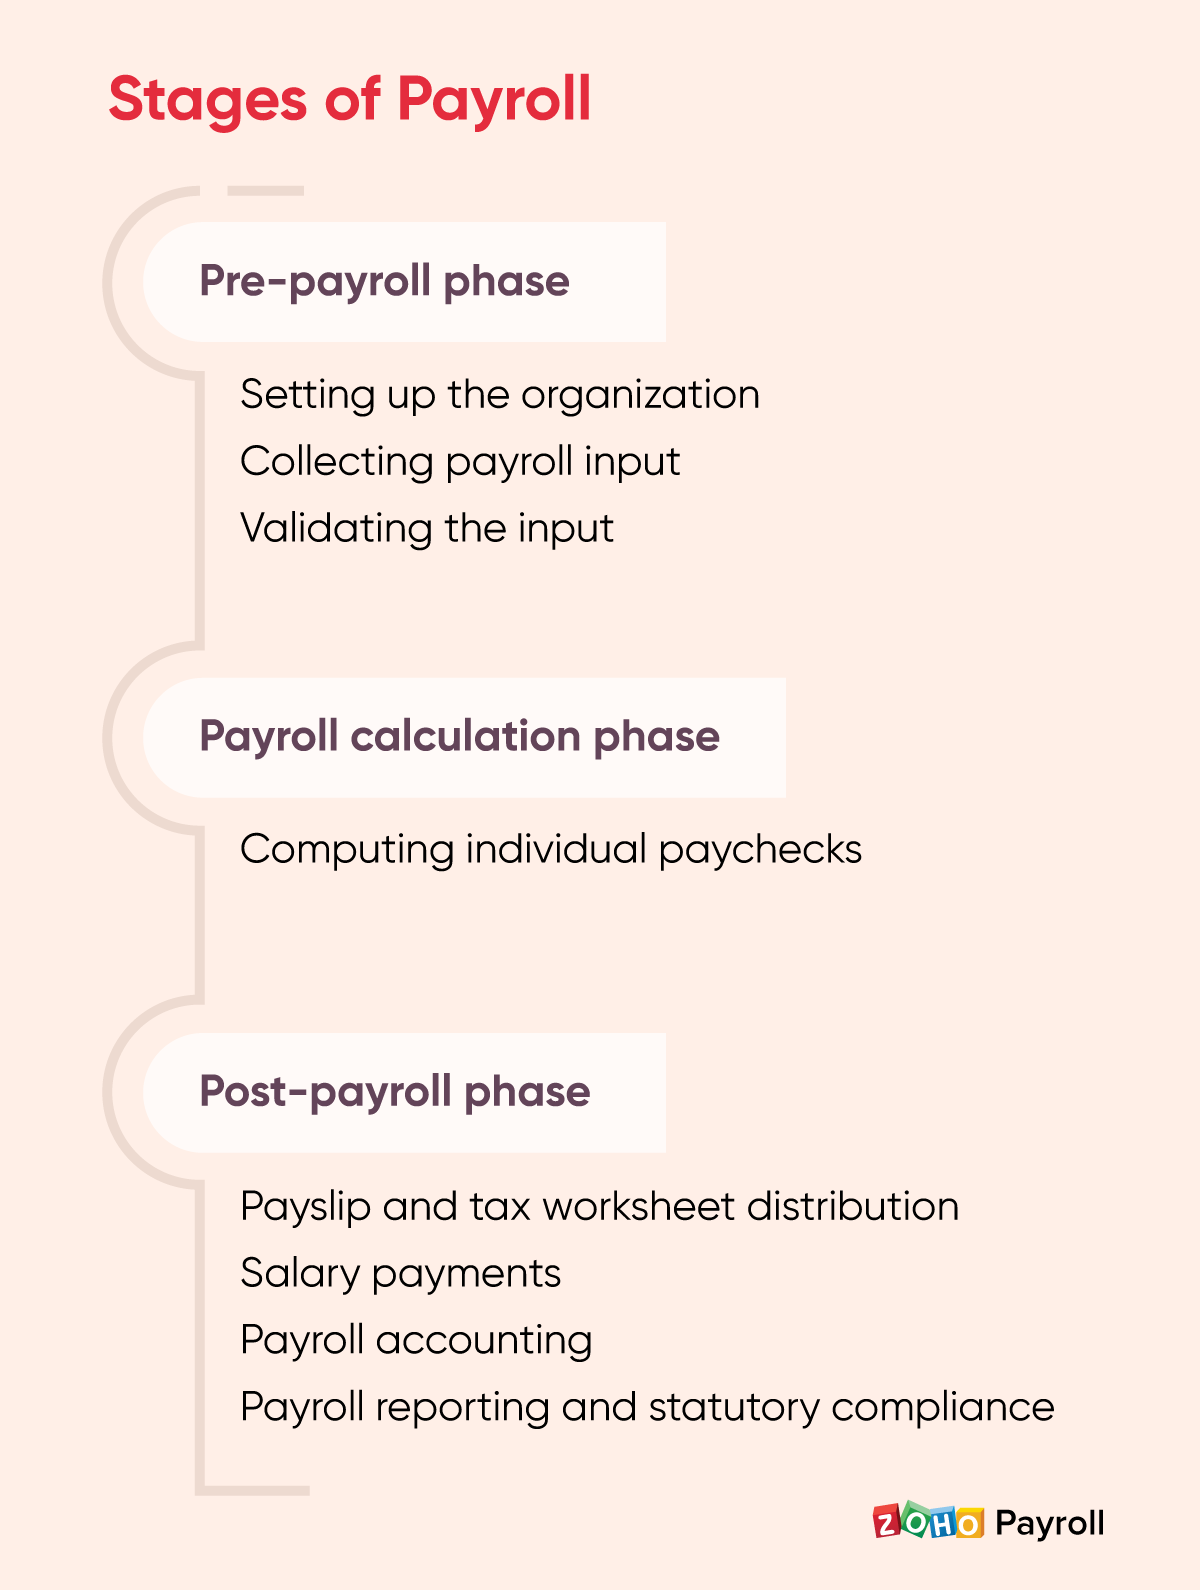 Three stages of payroll management - Zoho Payroll